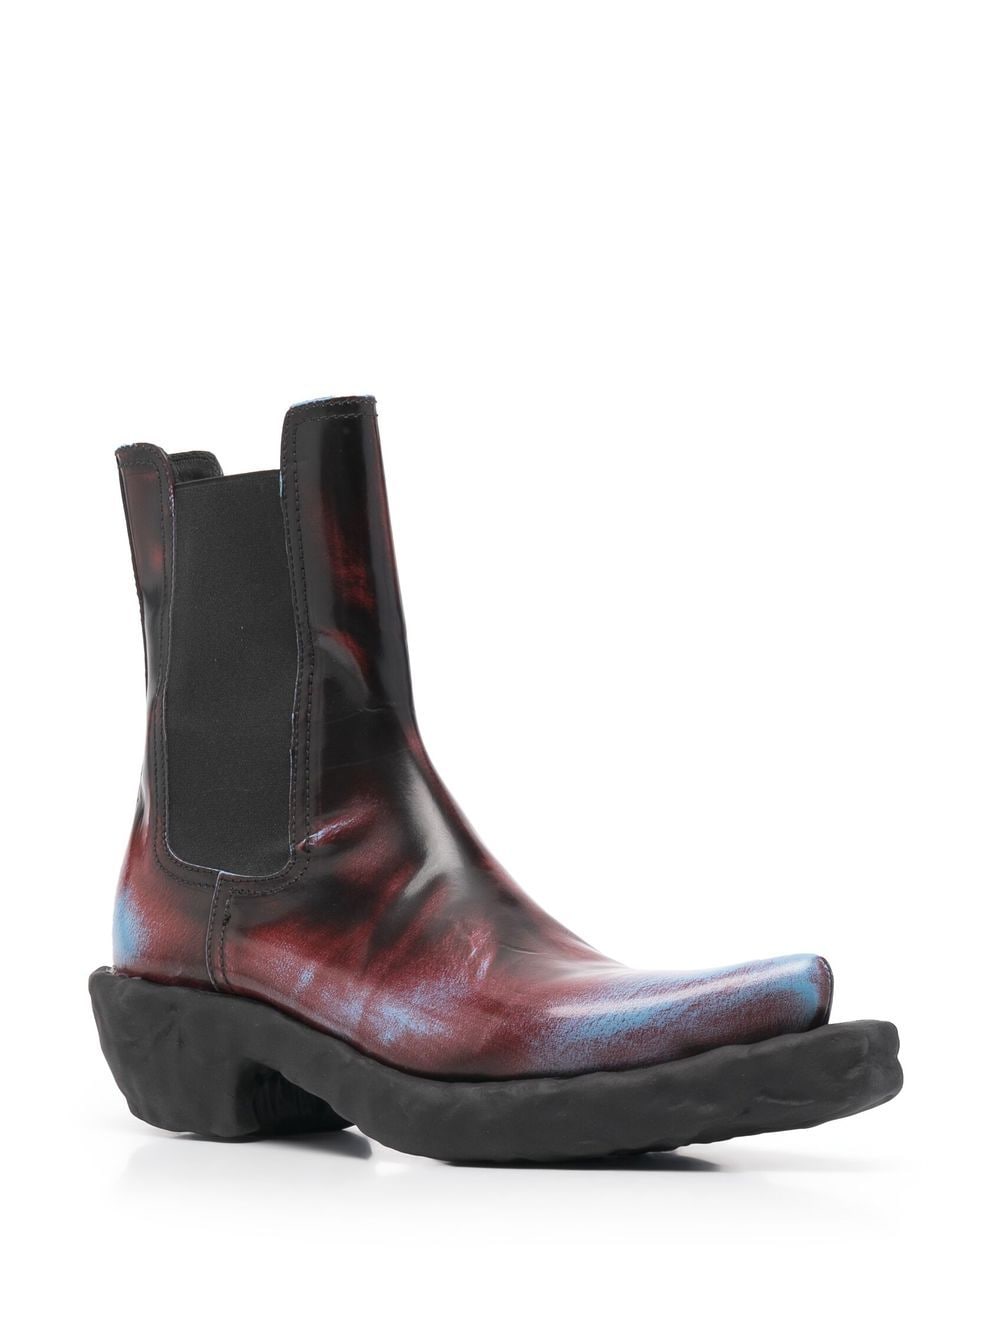 Image 2 of CamperLab Venga leather boots